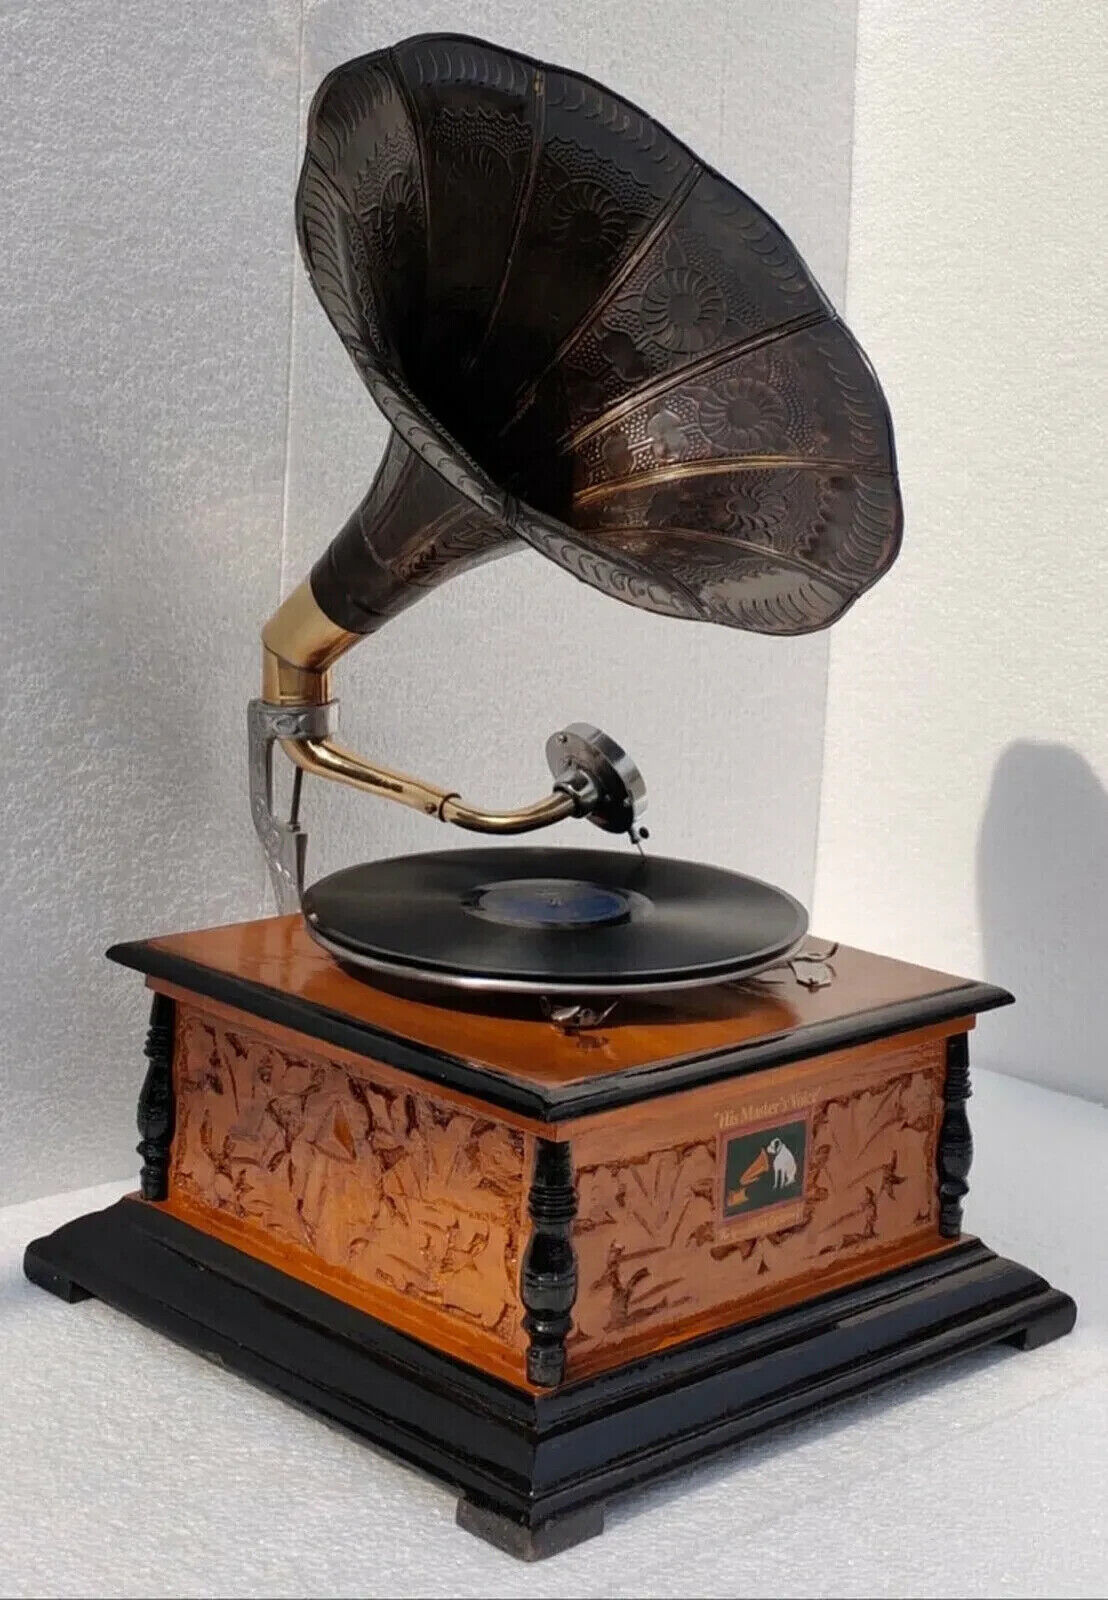 Antique Gramophone HMV Phonograph Record Vintage Player Portable Working 78 Win